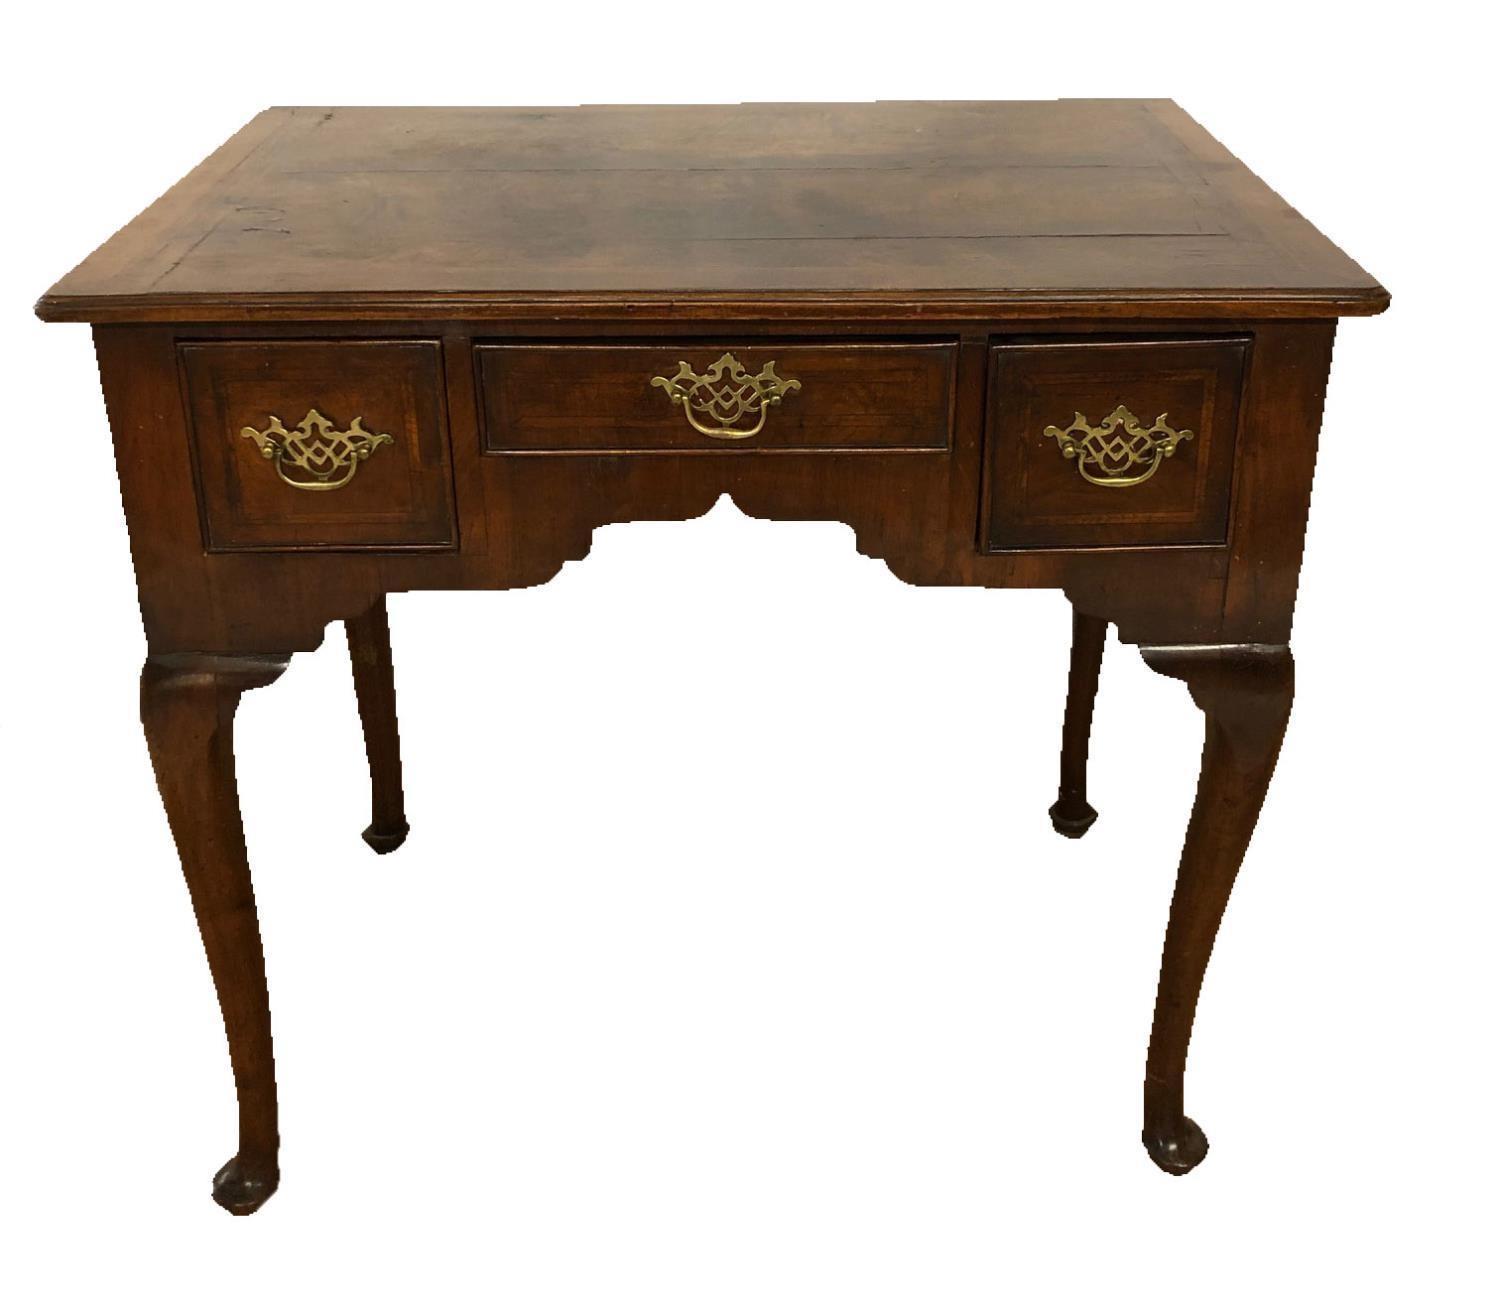 AN 18TH CENTURY WALNUT LOW BOYthe three drawers fitted with pierced brass handles on cabriole legs - Image 2 of 4